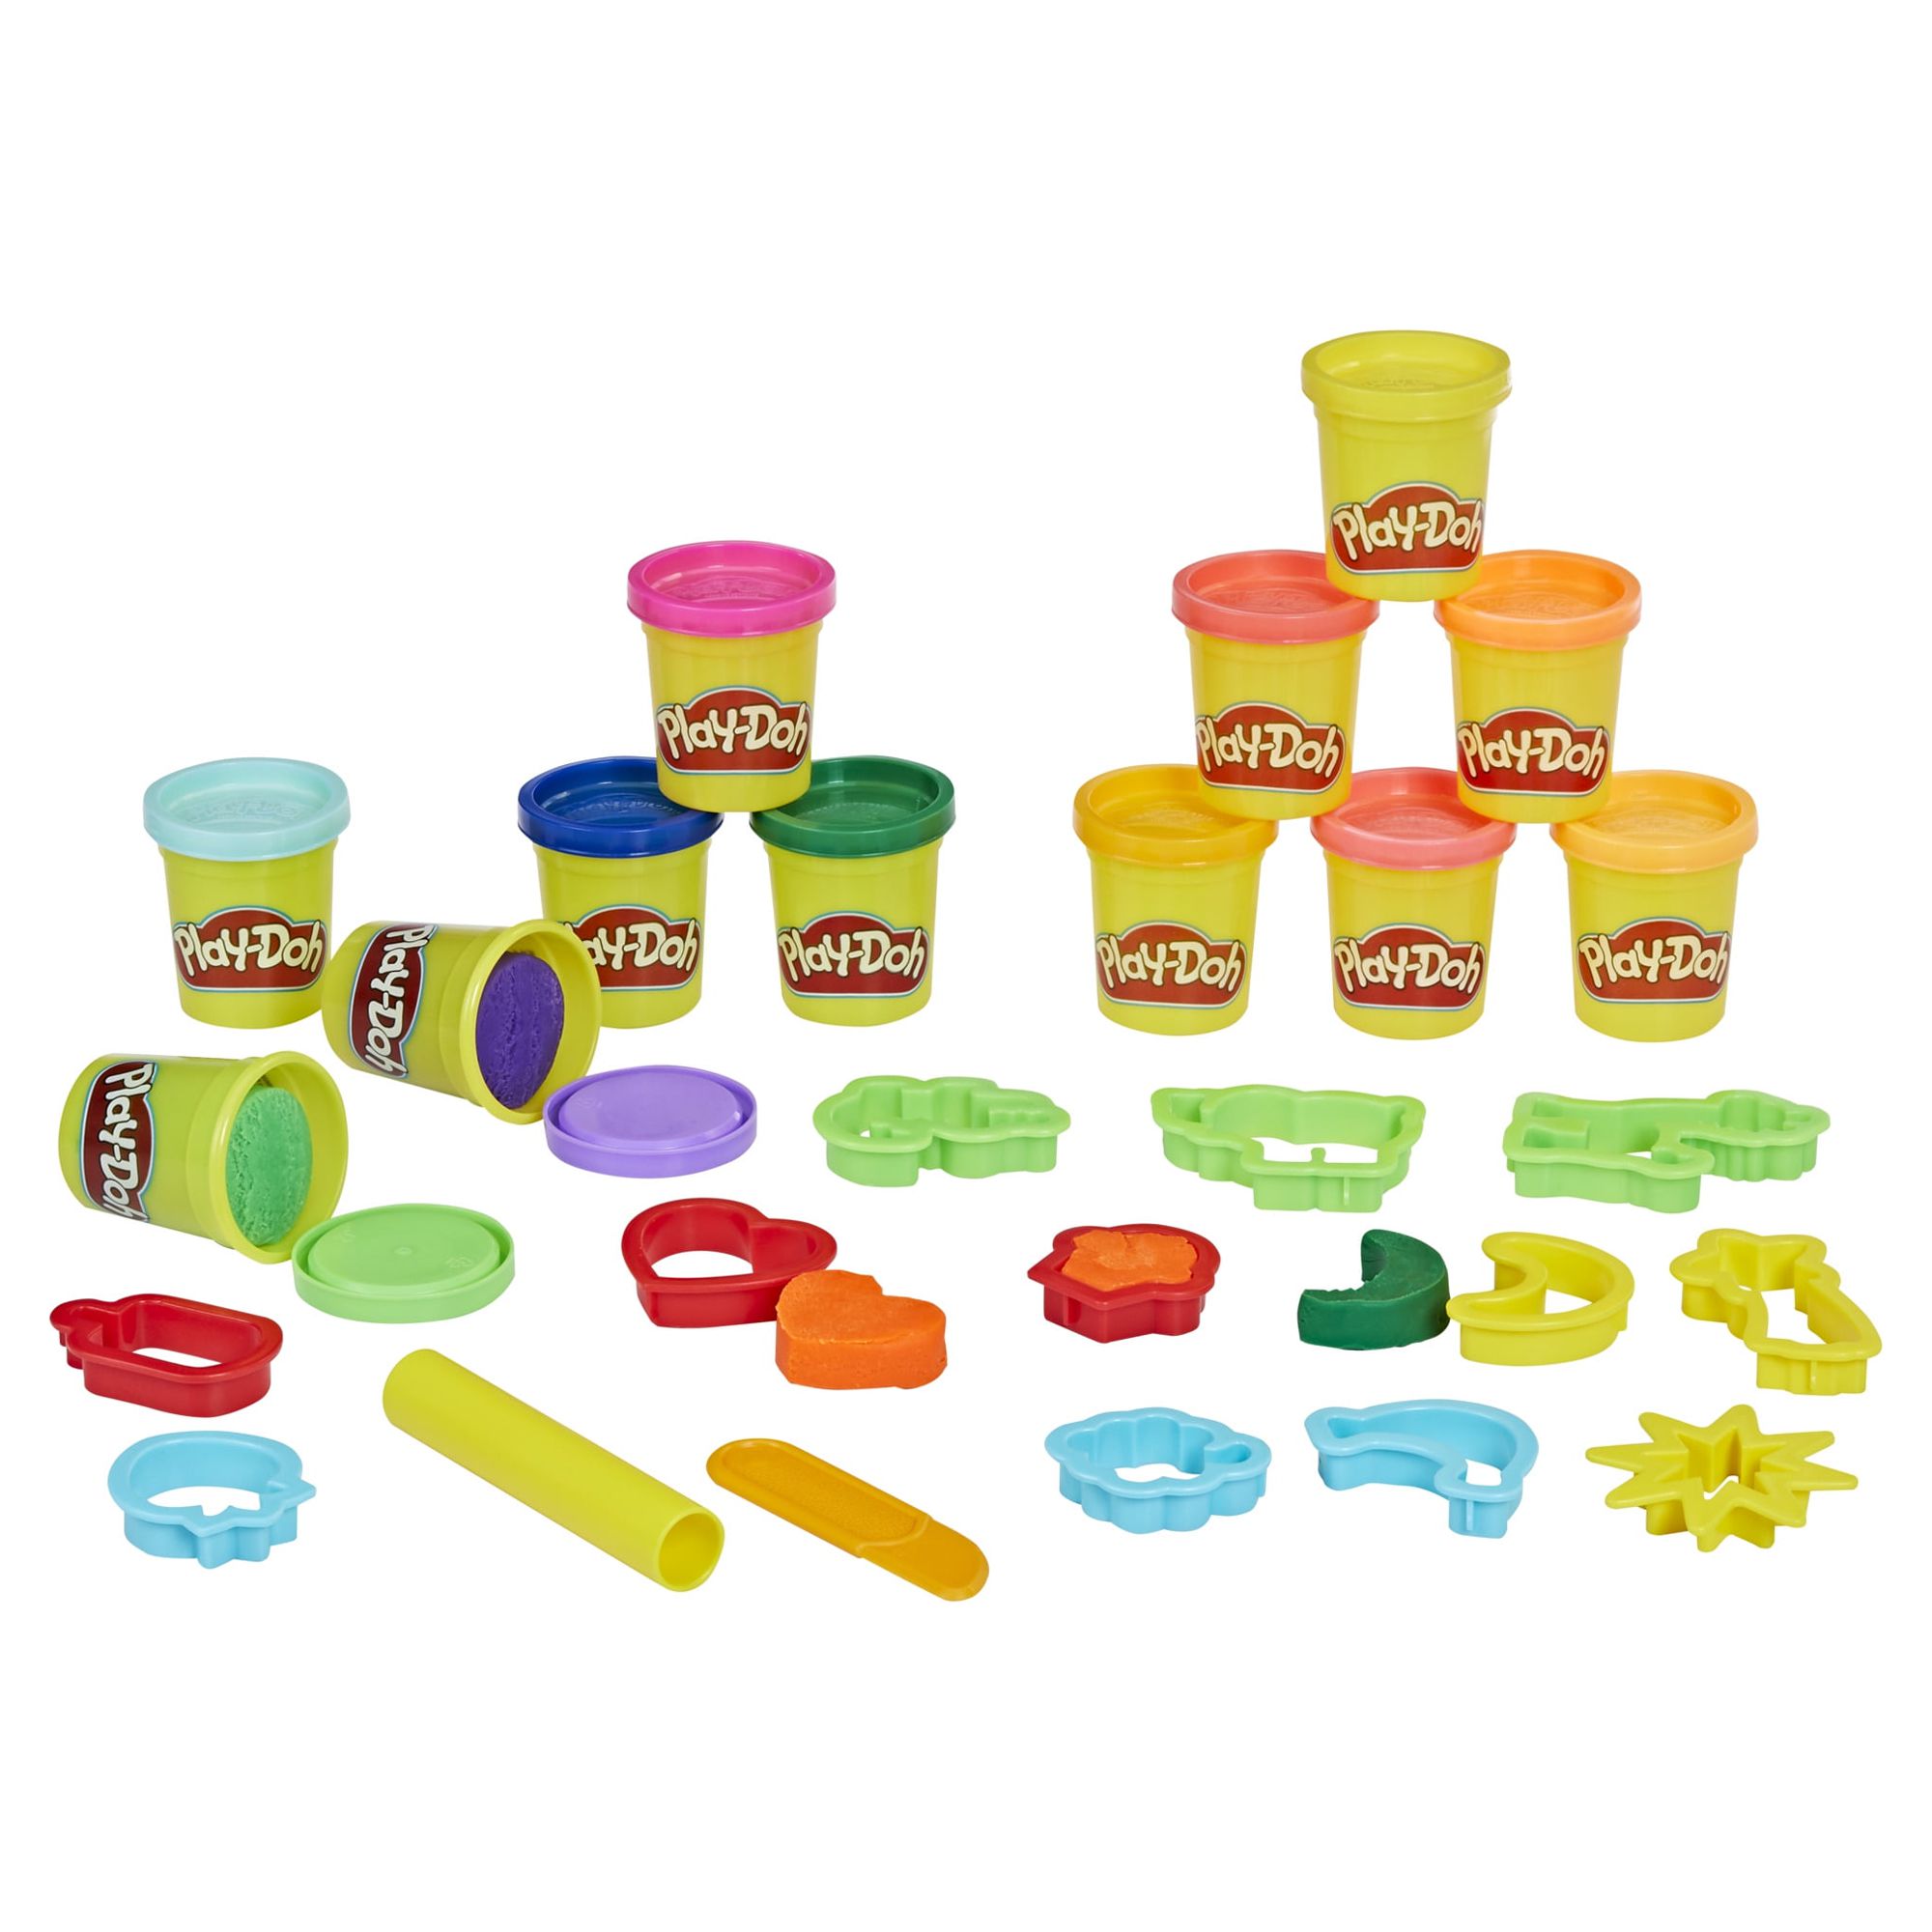 Play-Doh Bucket of Fun Play Dough Set - 20 Colors (20 Piece), Only At Walmart - image 5 of 8